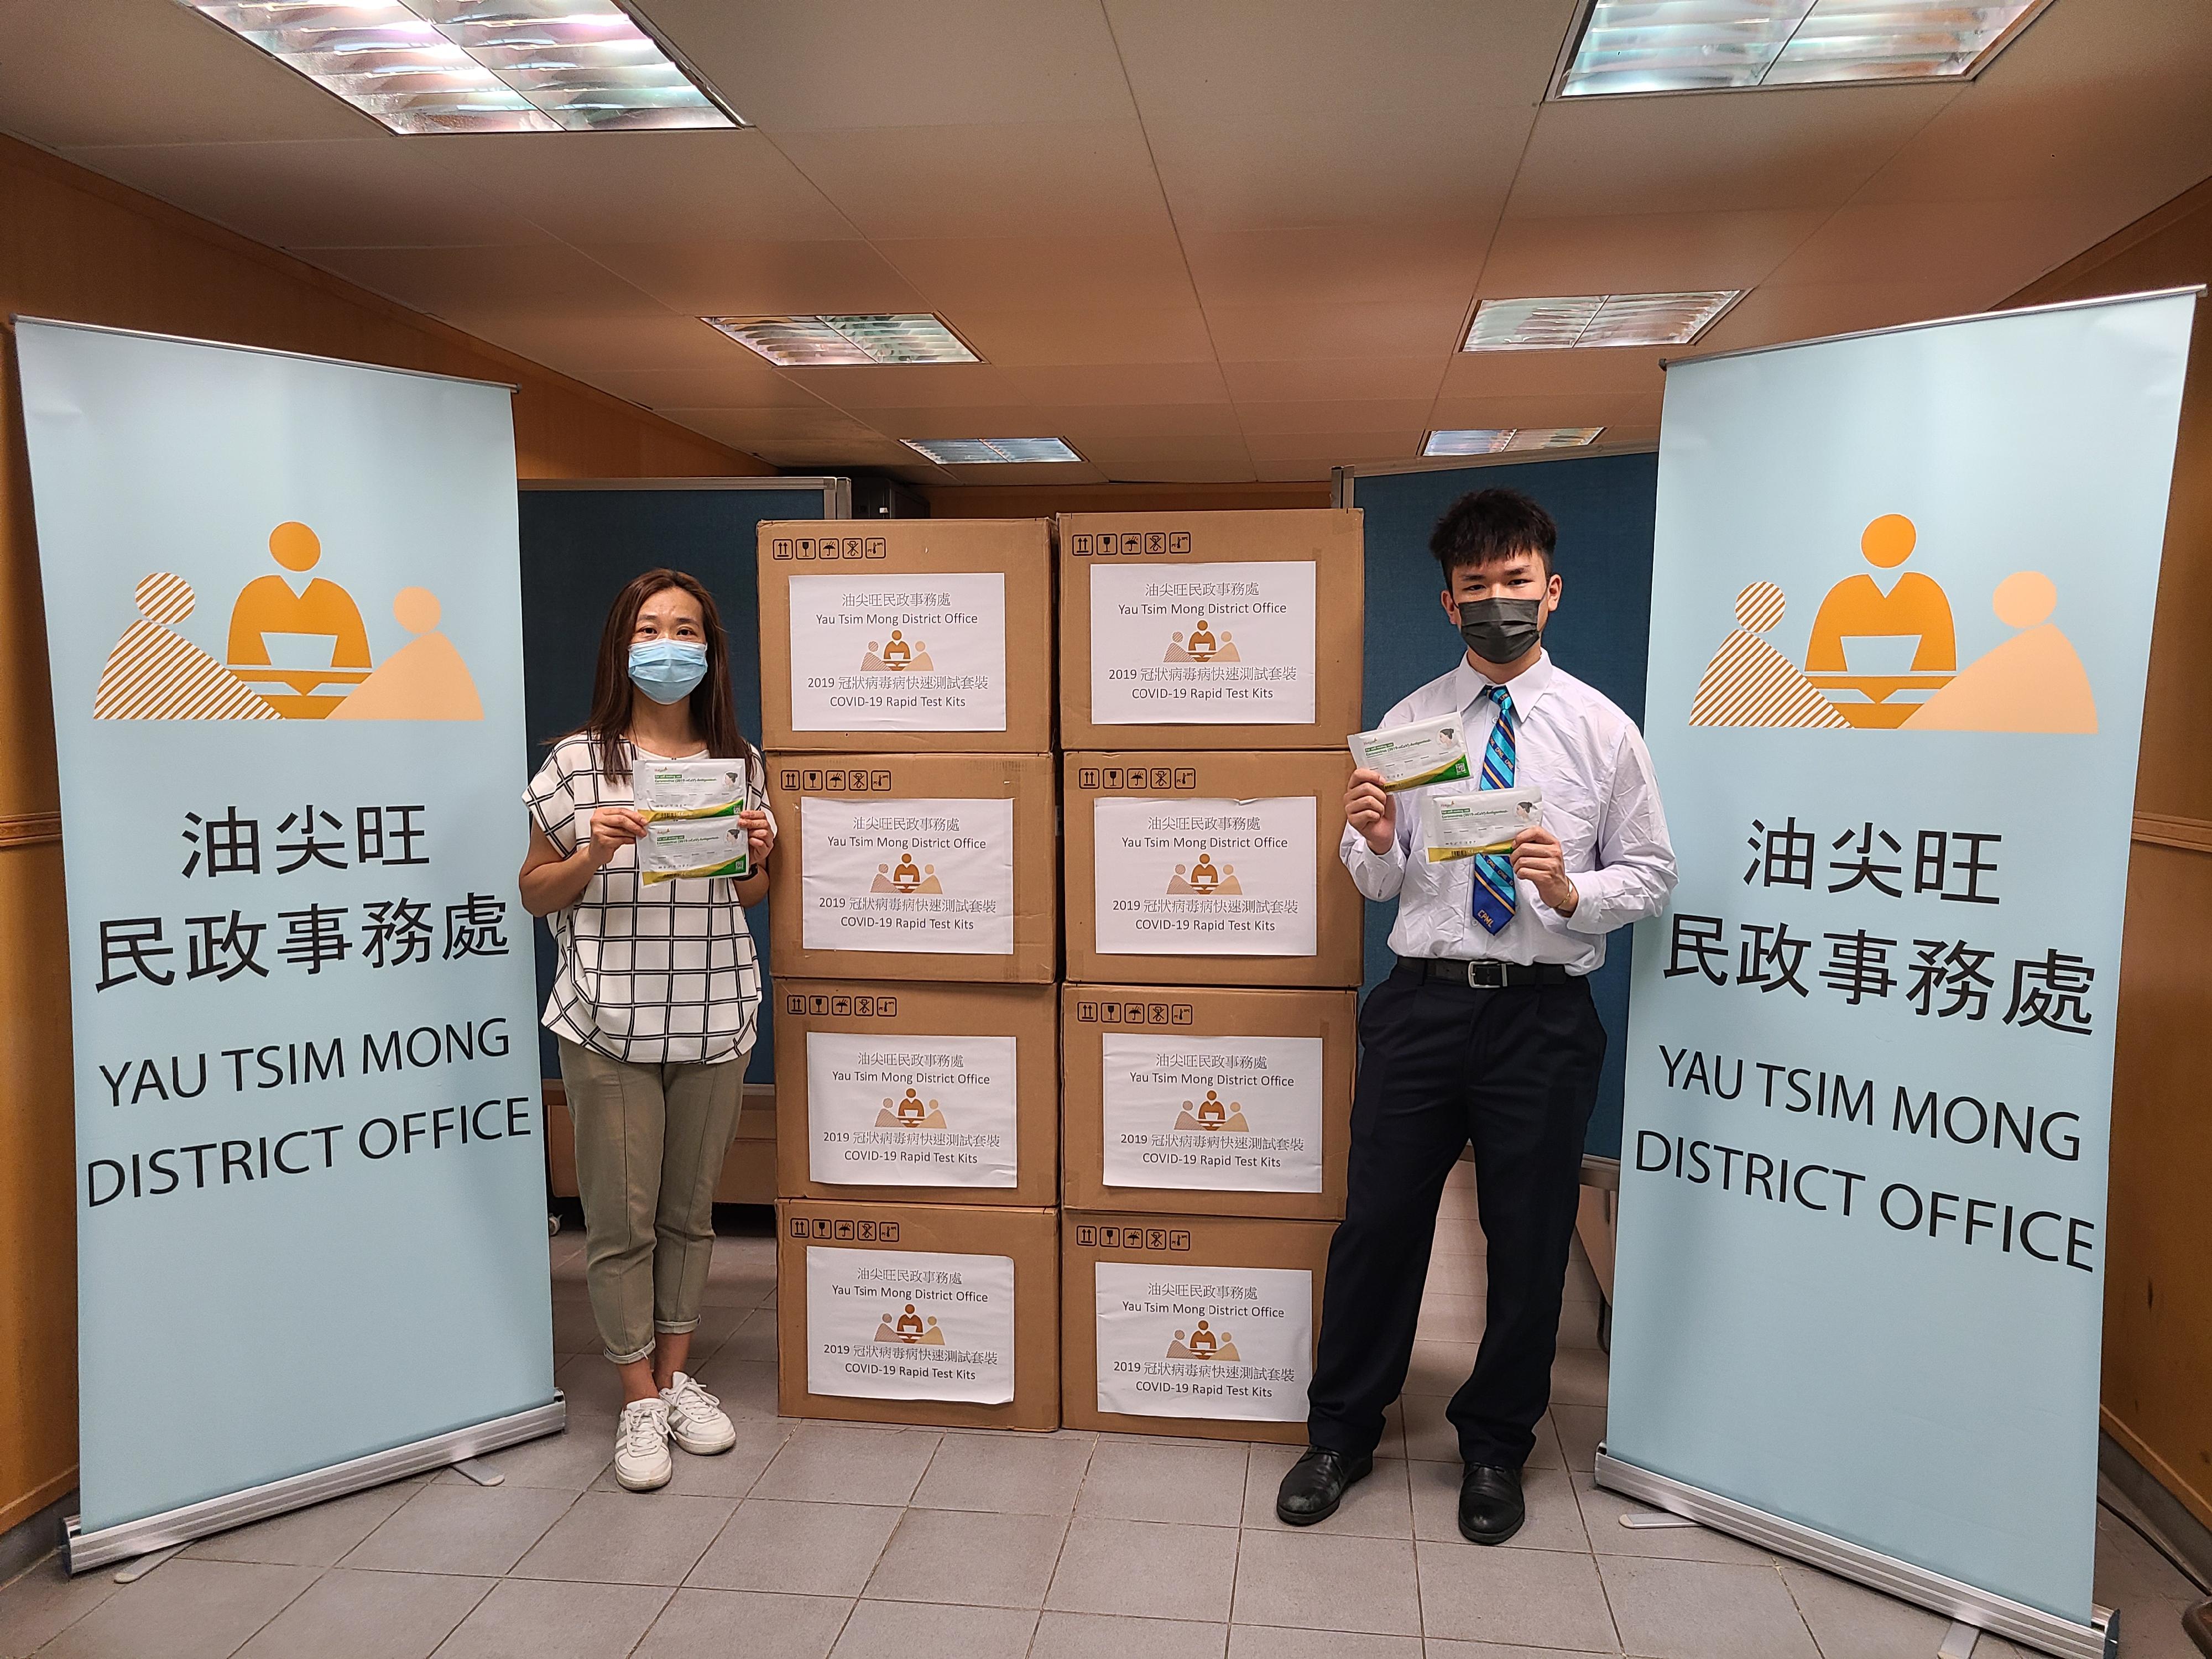 The Yau Tsim Mong District Office today (June 13) distributed COVID-19 rapid test kits to households, cleansing workers and property management staff living and working in Charming Garden for voluntary testing through the property management company.